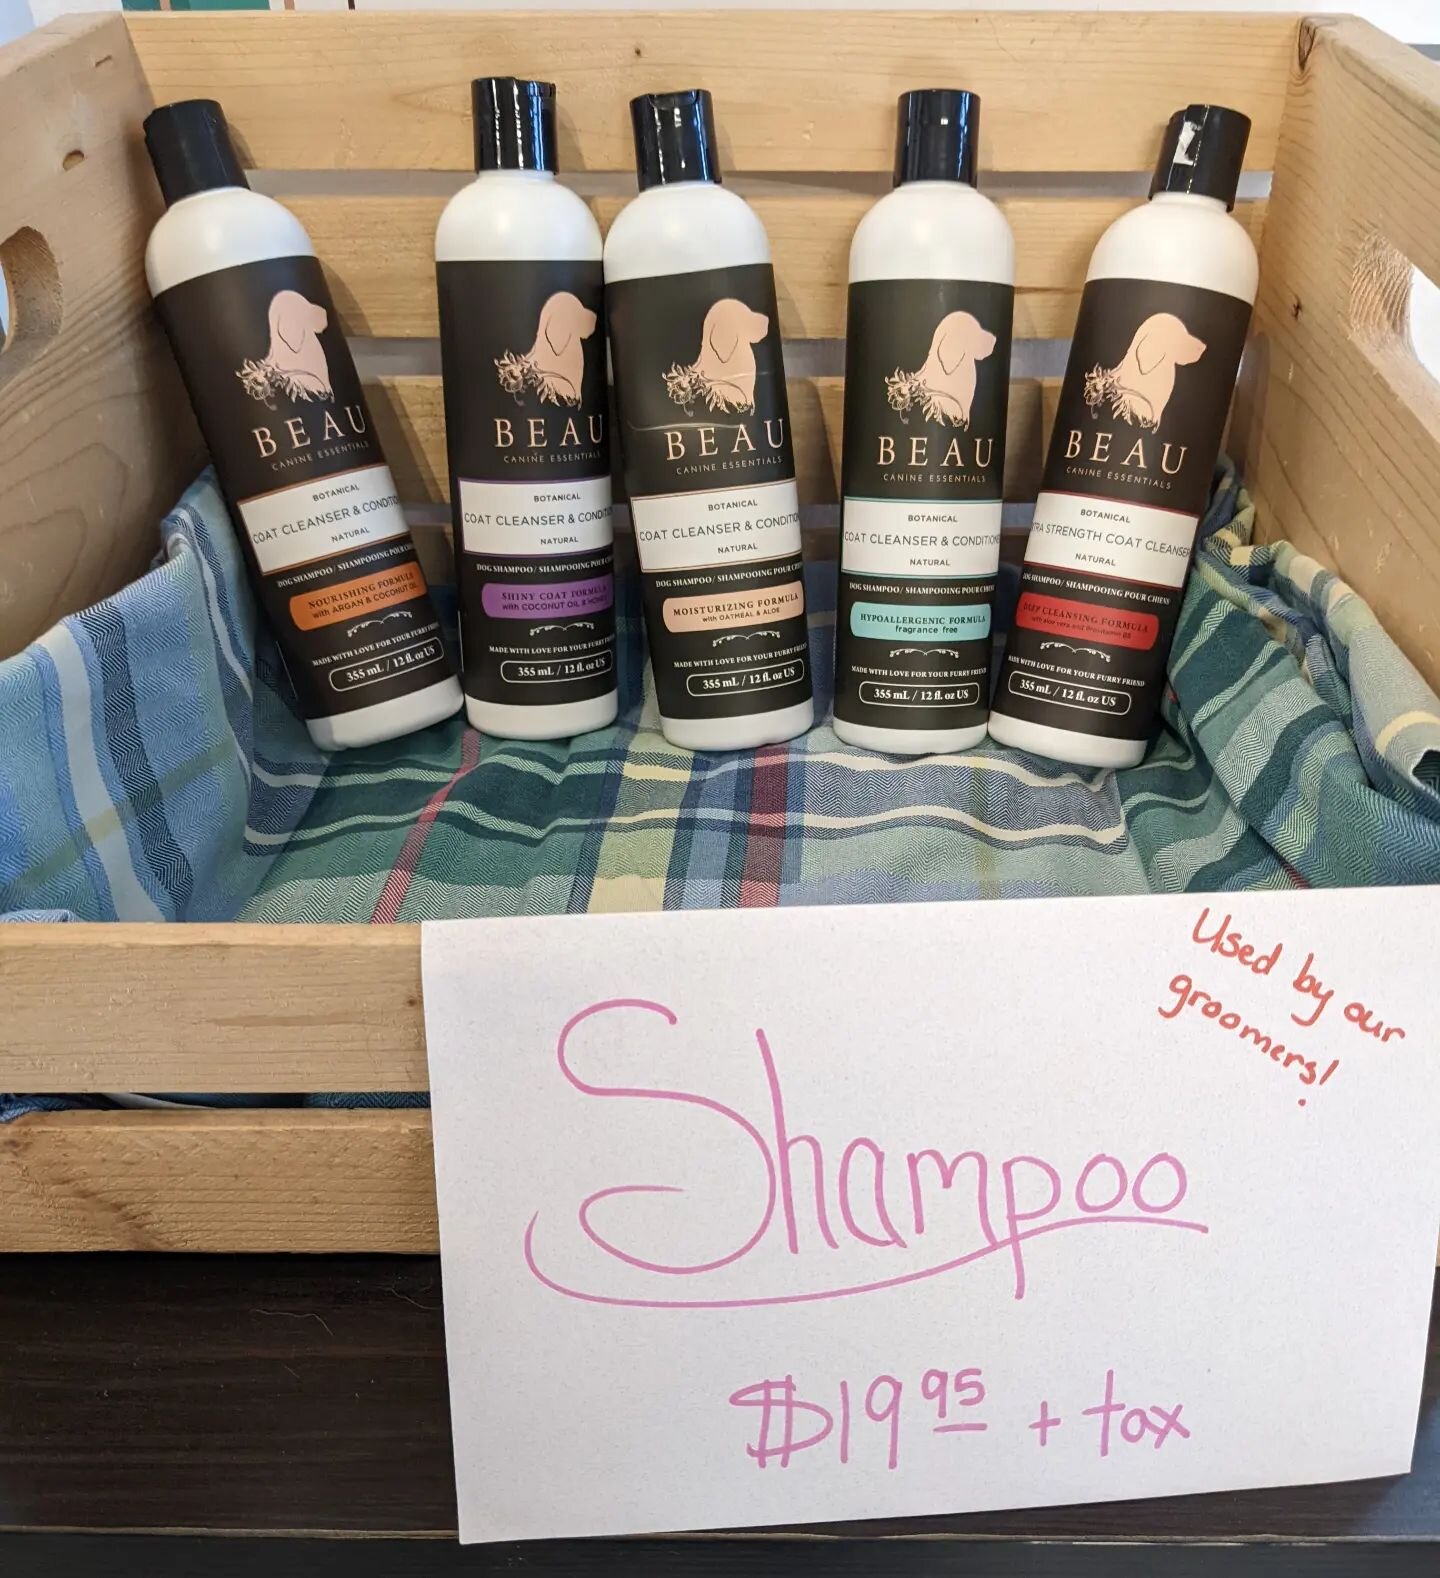 We are selling shampoo! Professional quality Beau shampoo that is used regularly by our groomers! Most bottles are hypo and tearless and all contain no harsh additives or preservatives to leave your pet fresh and comfortable! For any questions feel f